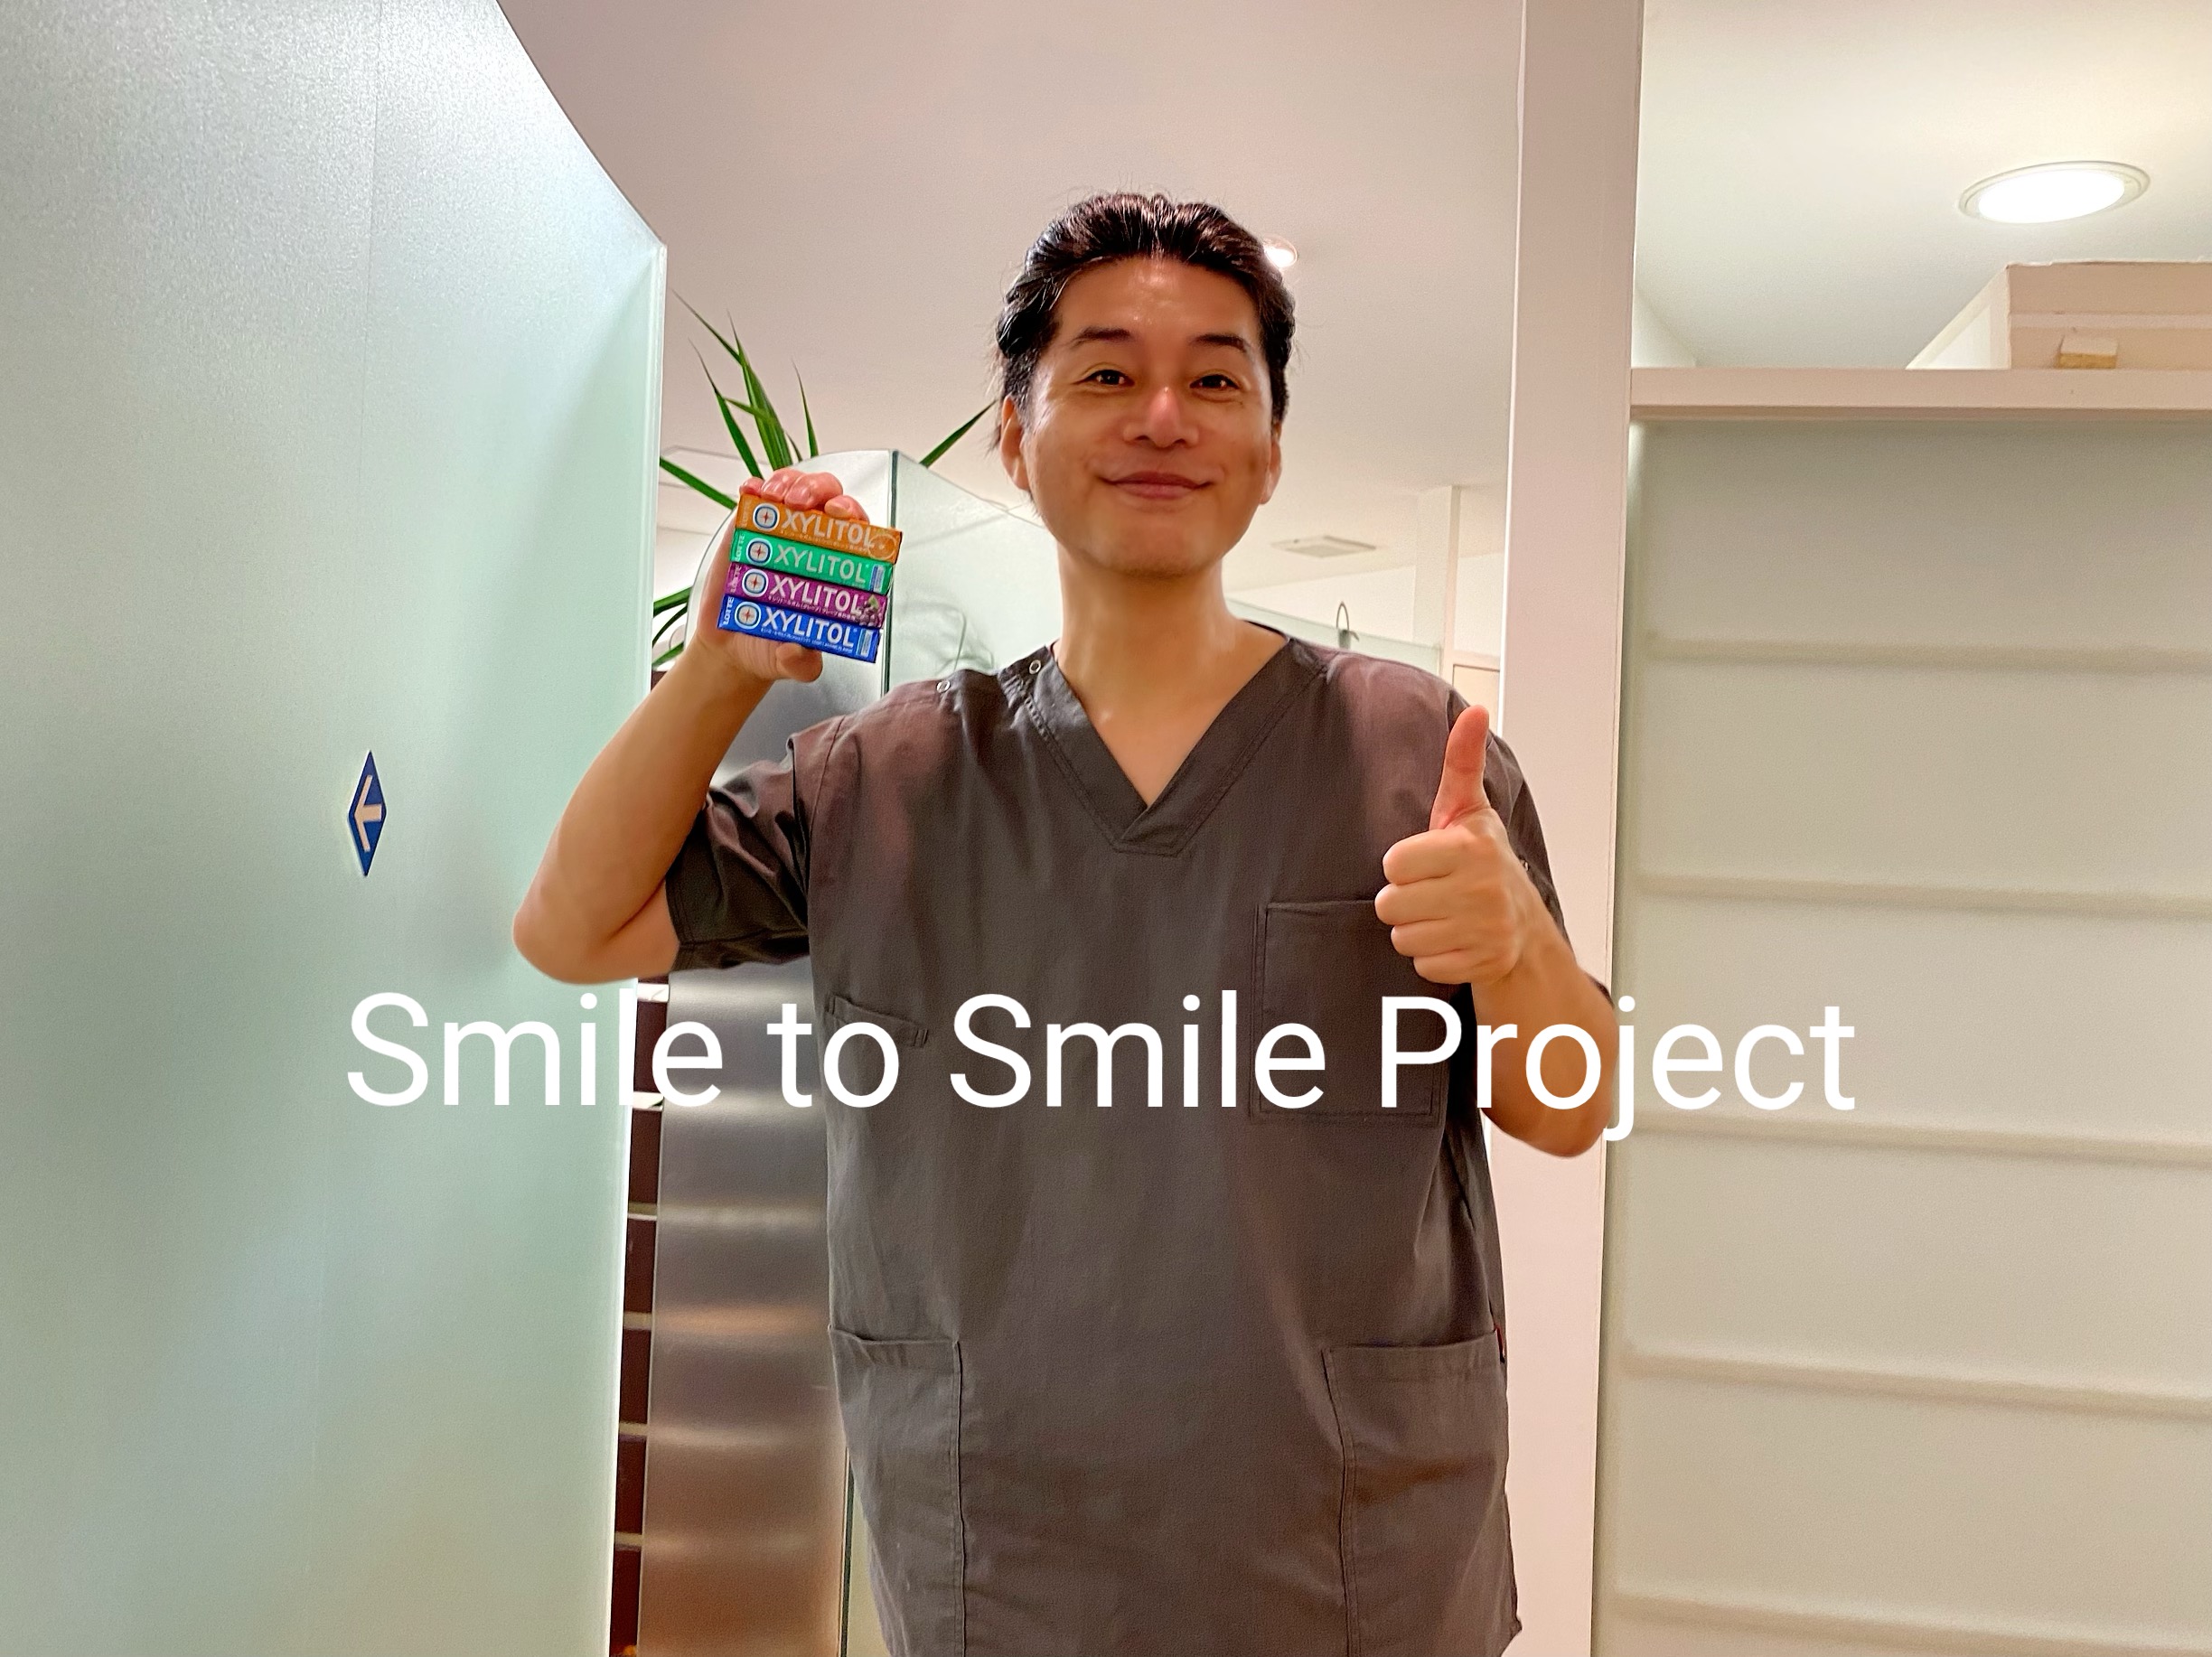 Smile to Smile Project